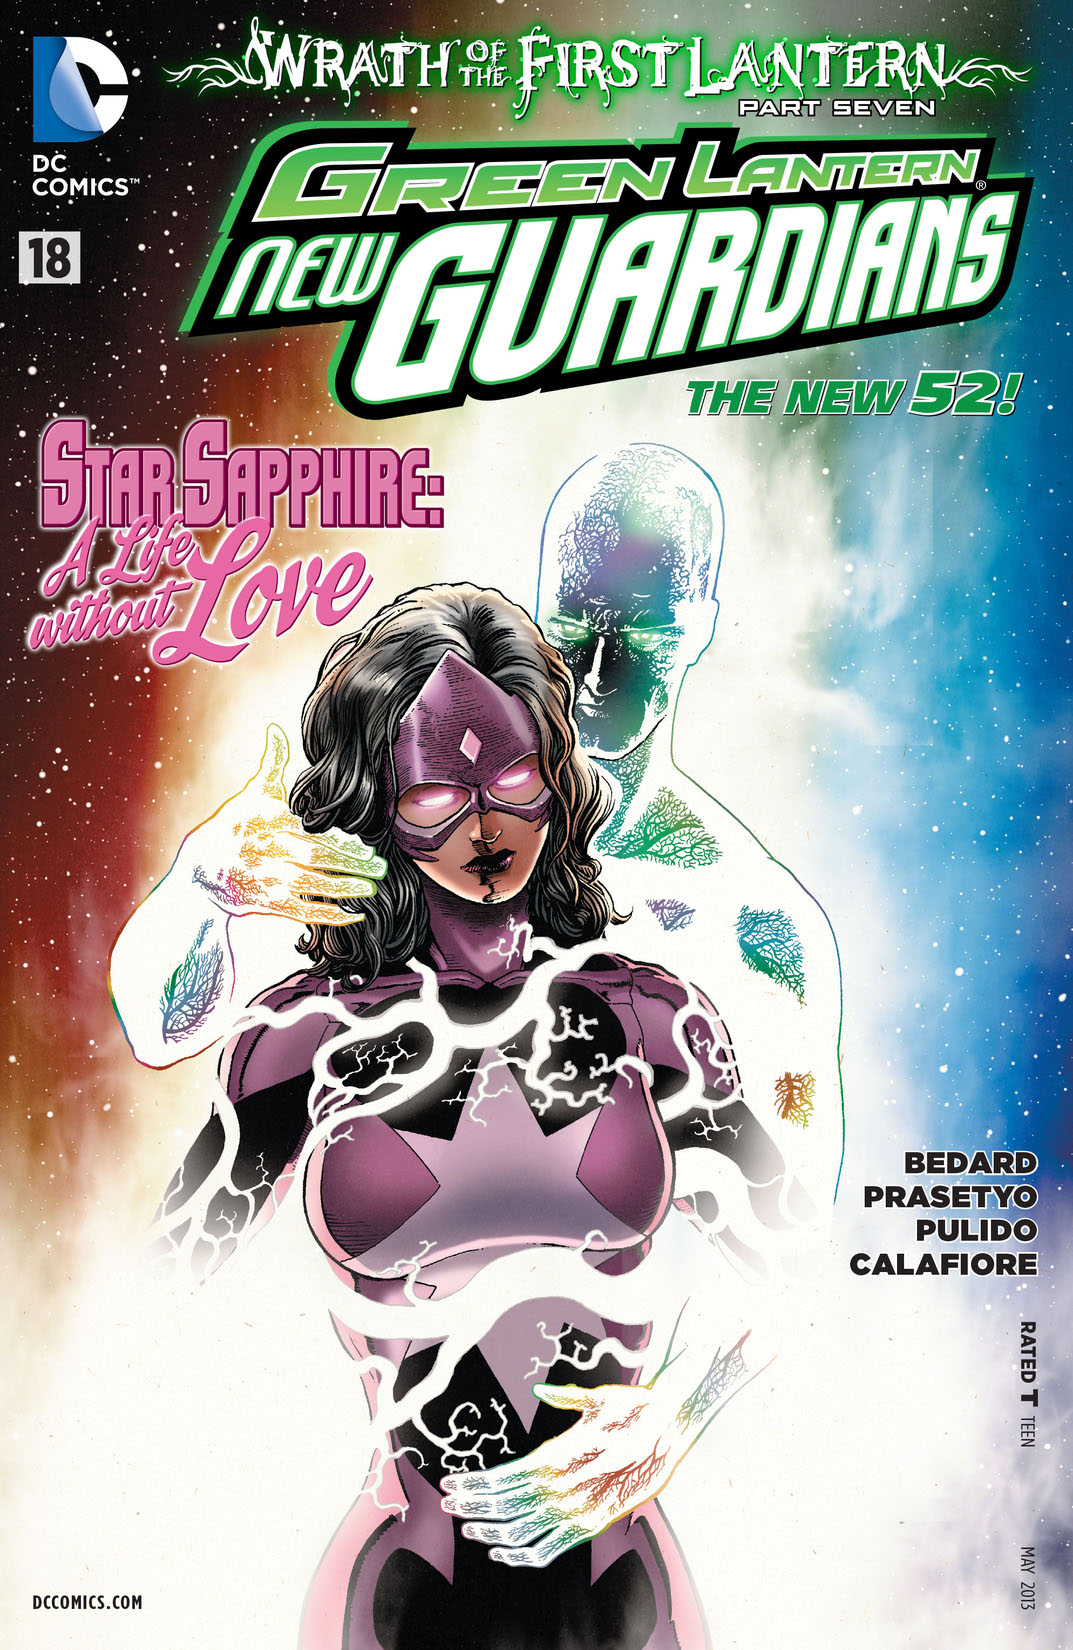 Green Lantern: New Guardians #18 preview images